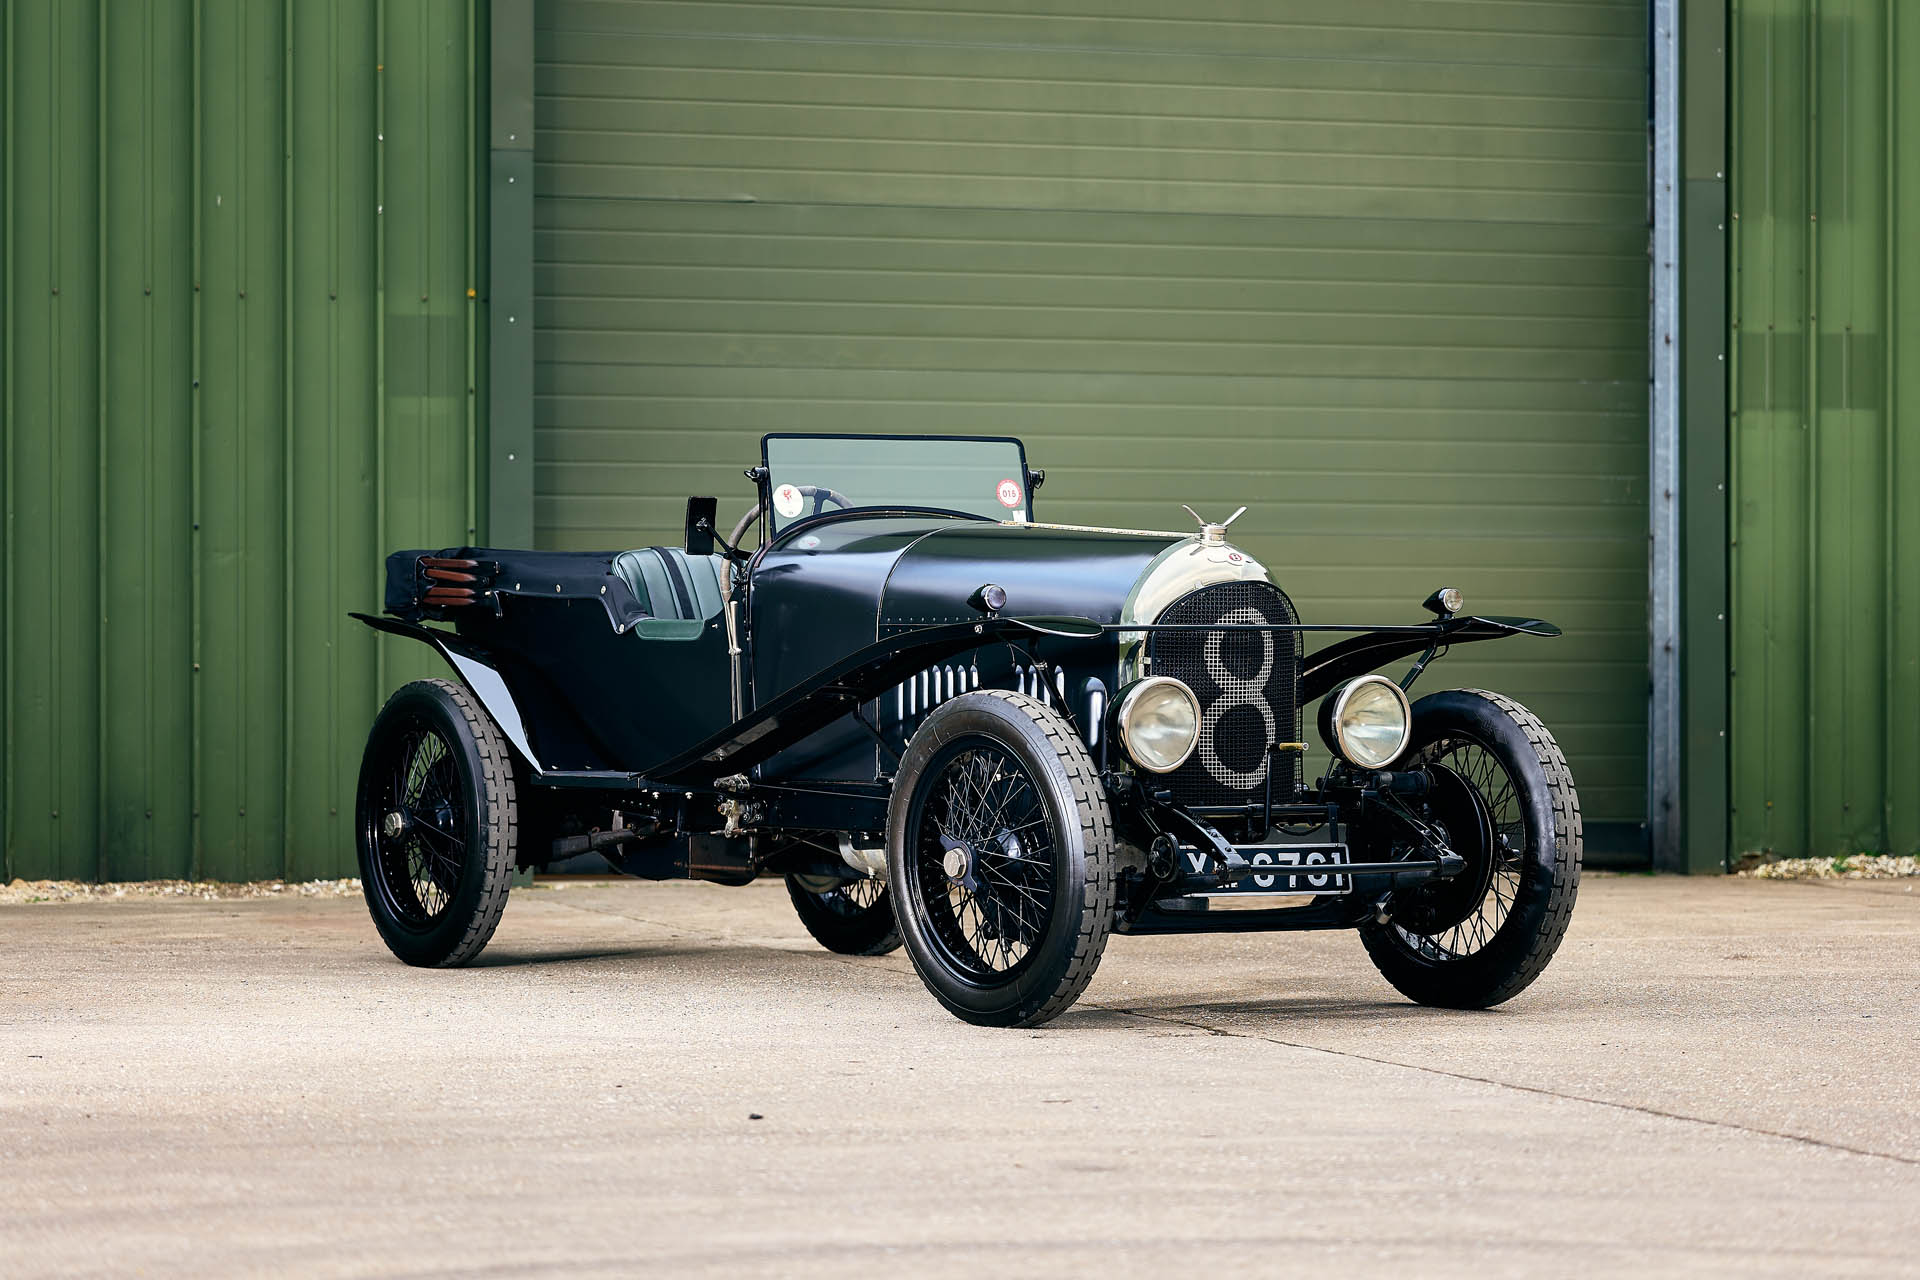 Bentley 3 Litre Chassis 141